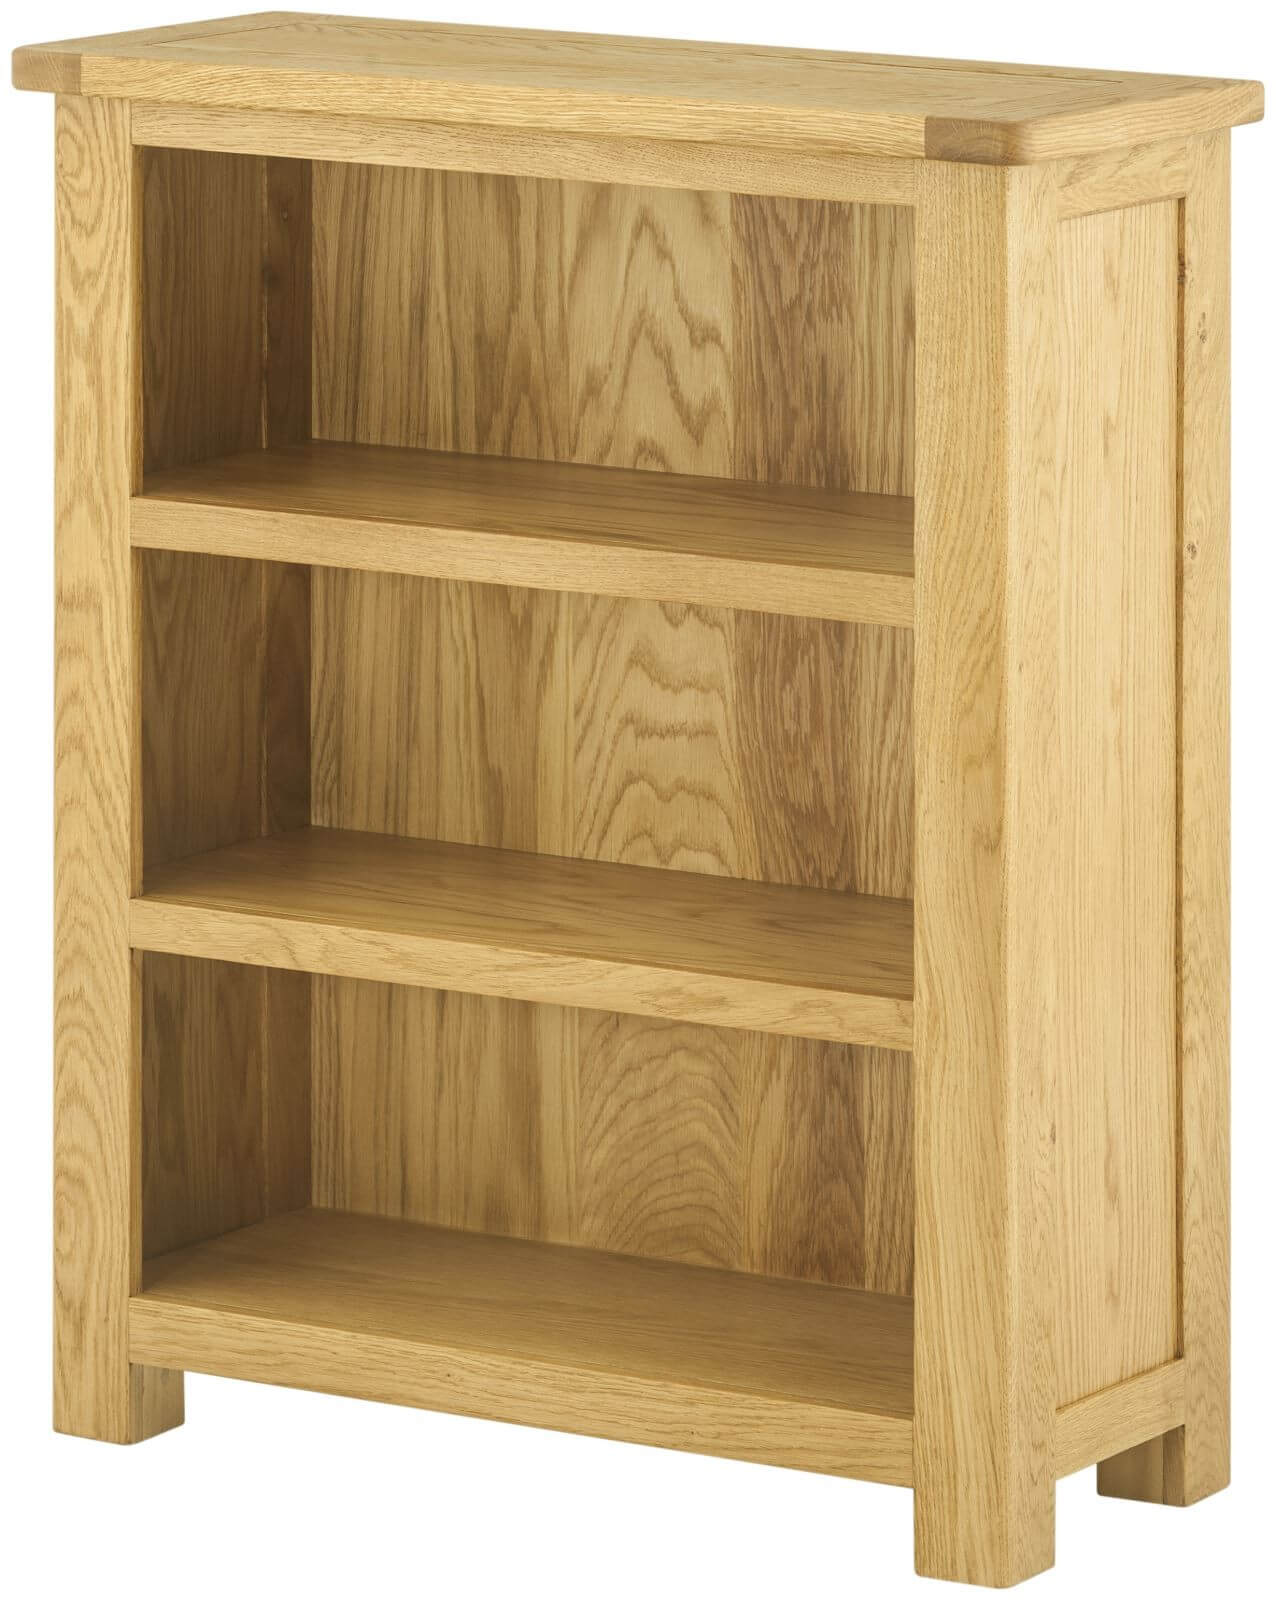 Showing image for Seattle bookcase - small